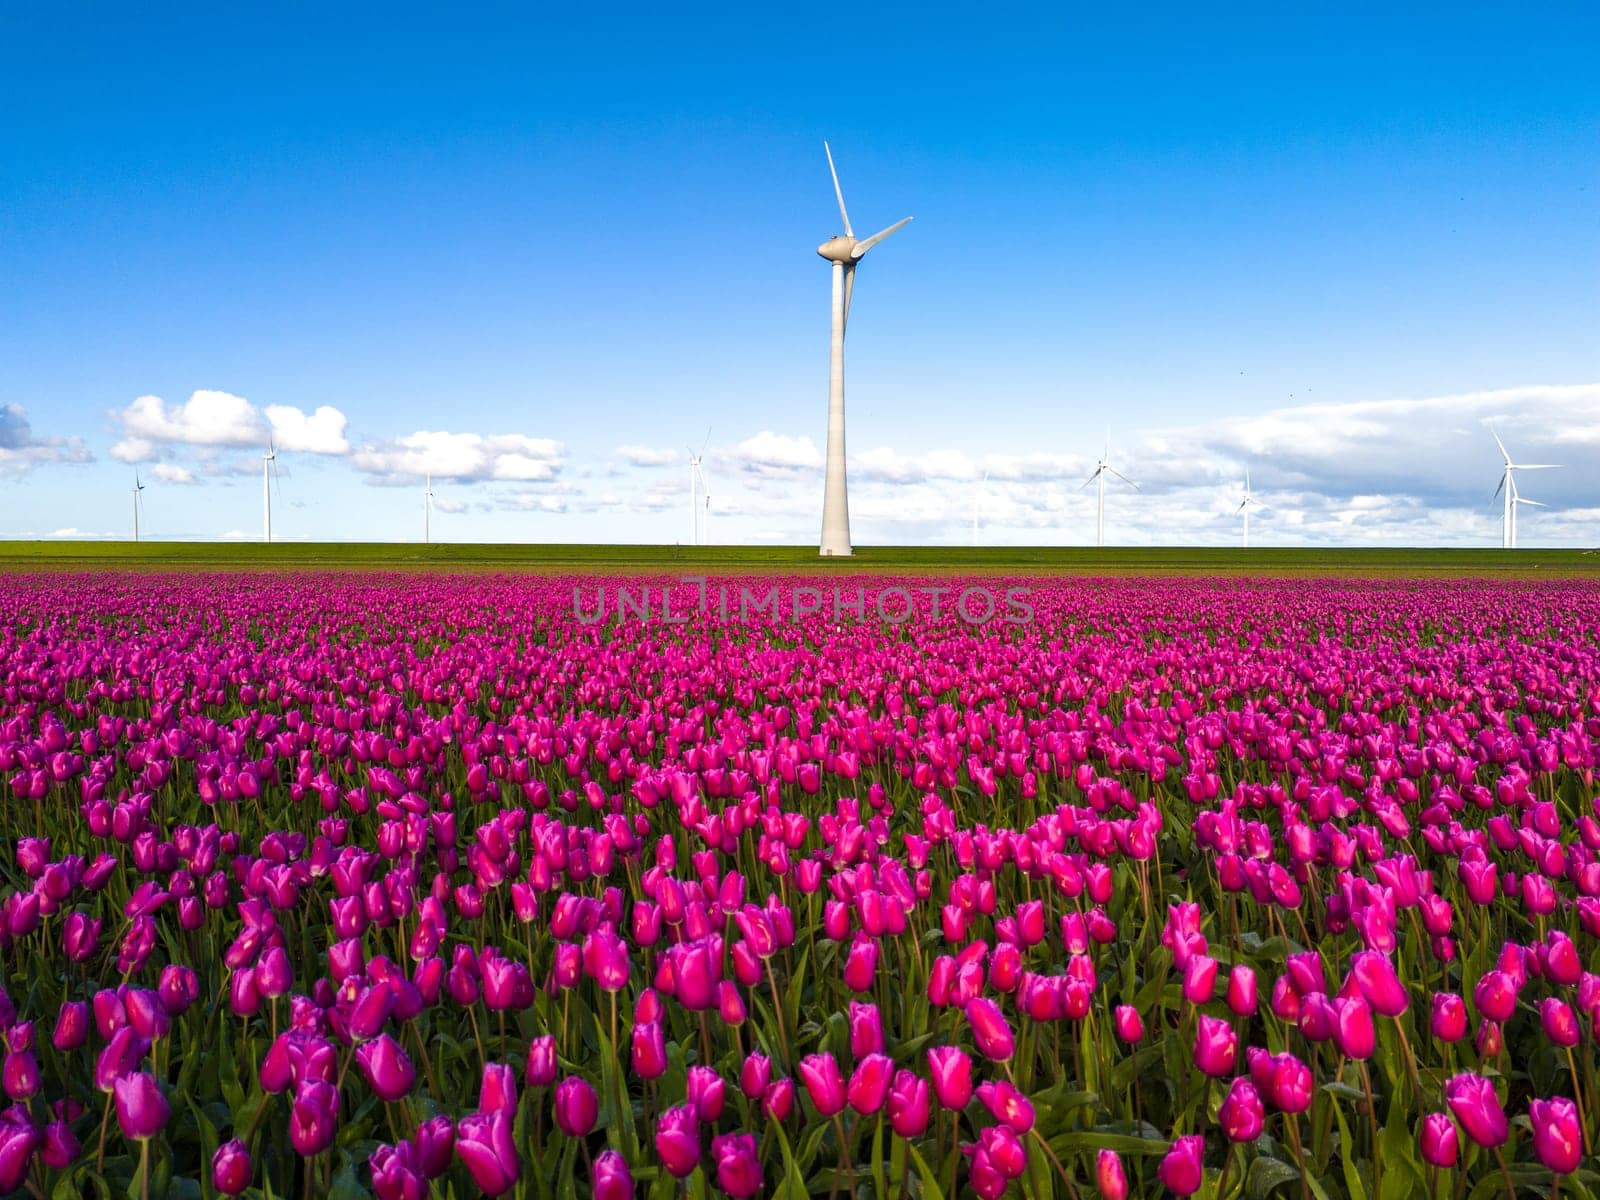 A vibrant field of pink tulips dances in the breeze, framed by the iconic silhouette of a windmill in the background.